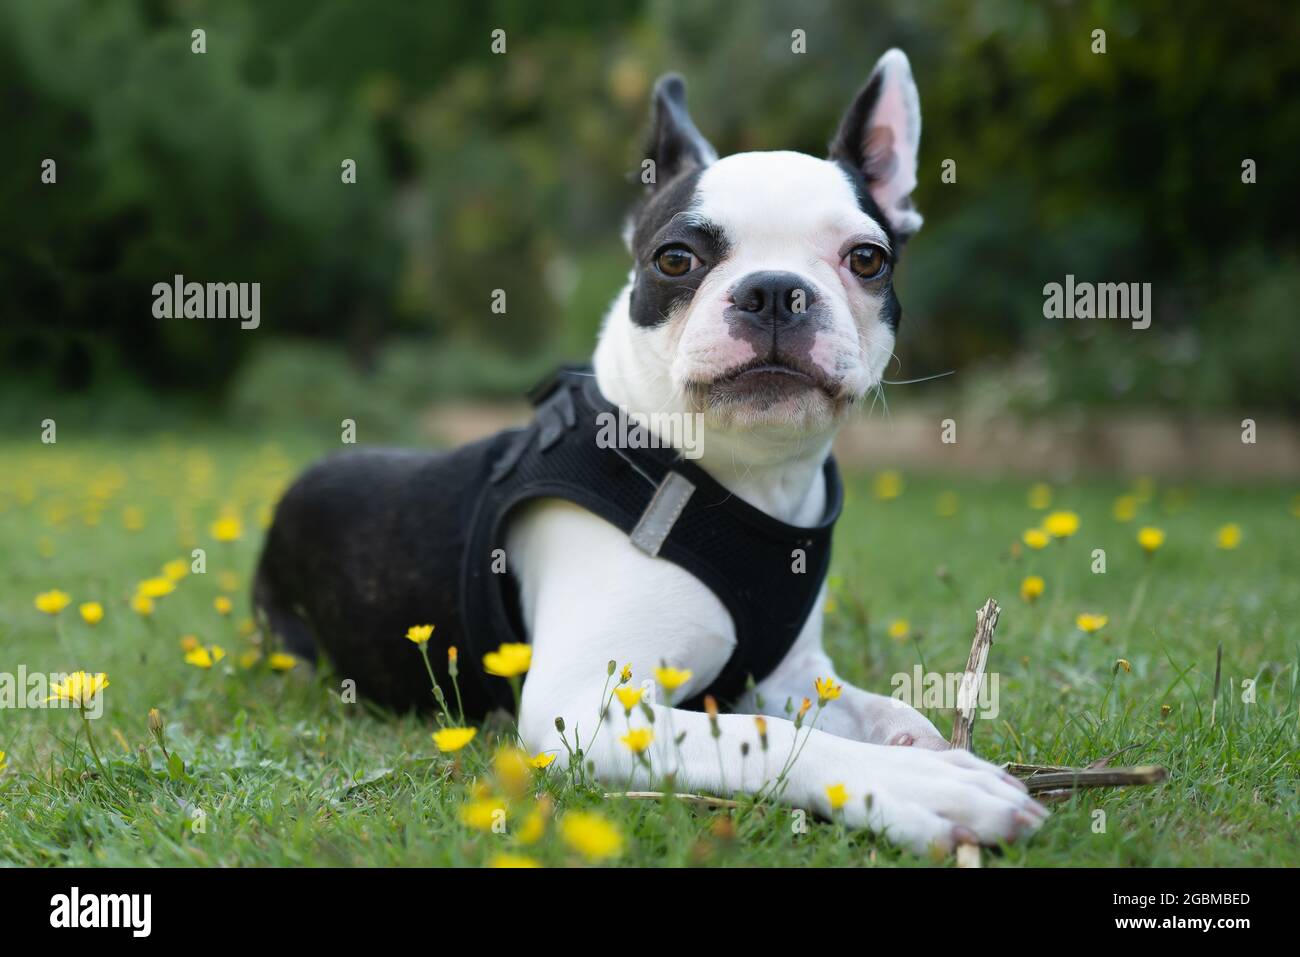 Boston Terrier puppy lying on grass holding a twig, she is looking at the camera. She is wearing a harness. Stock Photo